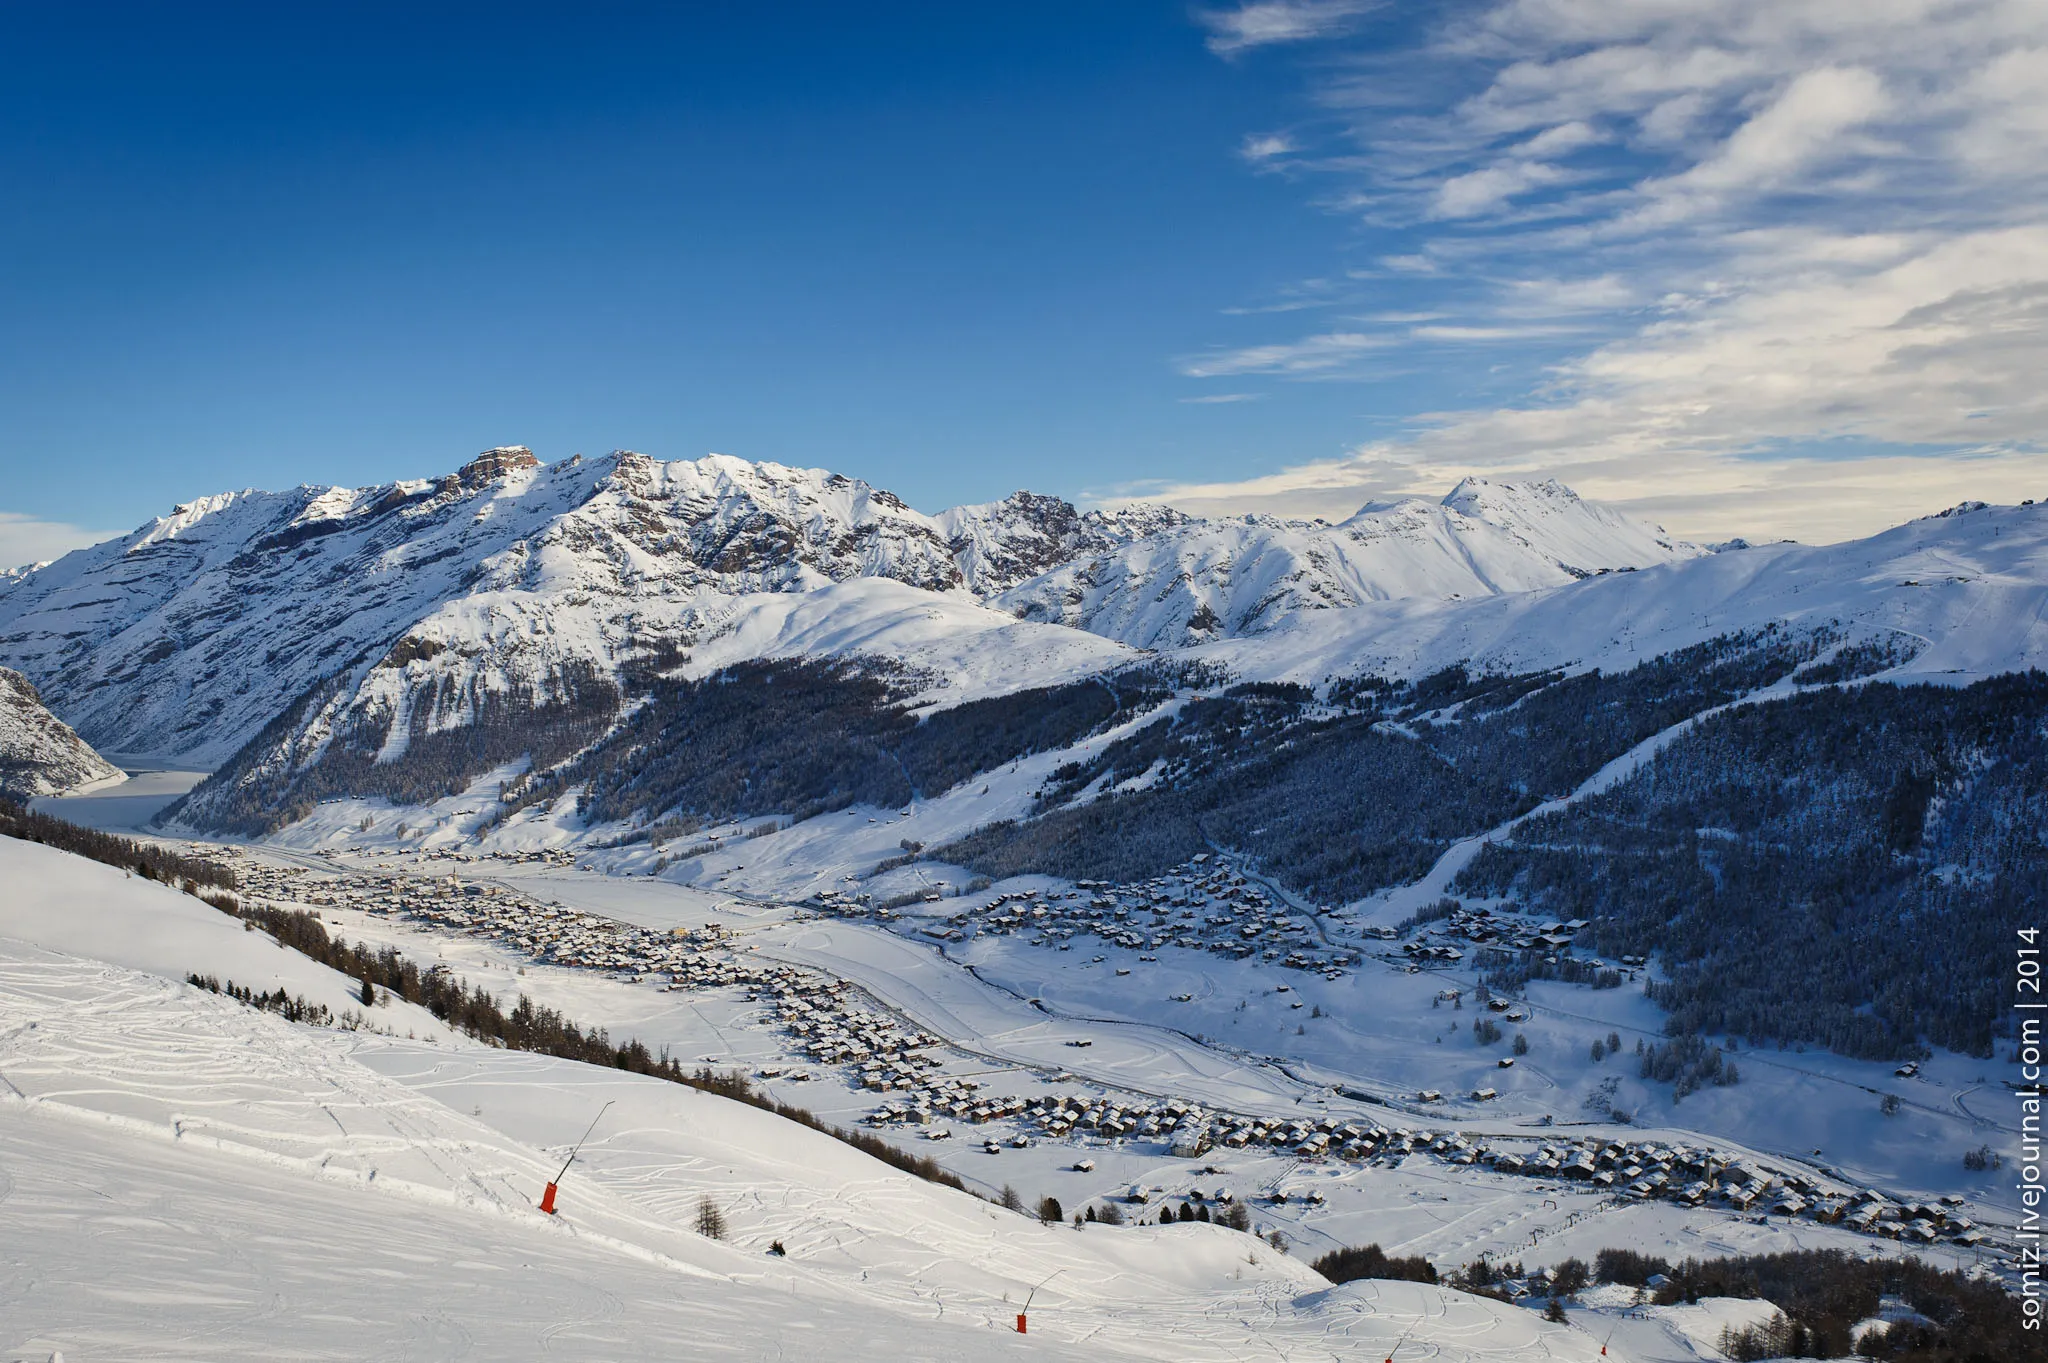 Photo showing: Livigno - is a town and comune in the province of Sondrio, in the region of Lombardy, Italy, located in the Italian Alps, near the Swiss border. dec. 2013 - jan. 2014